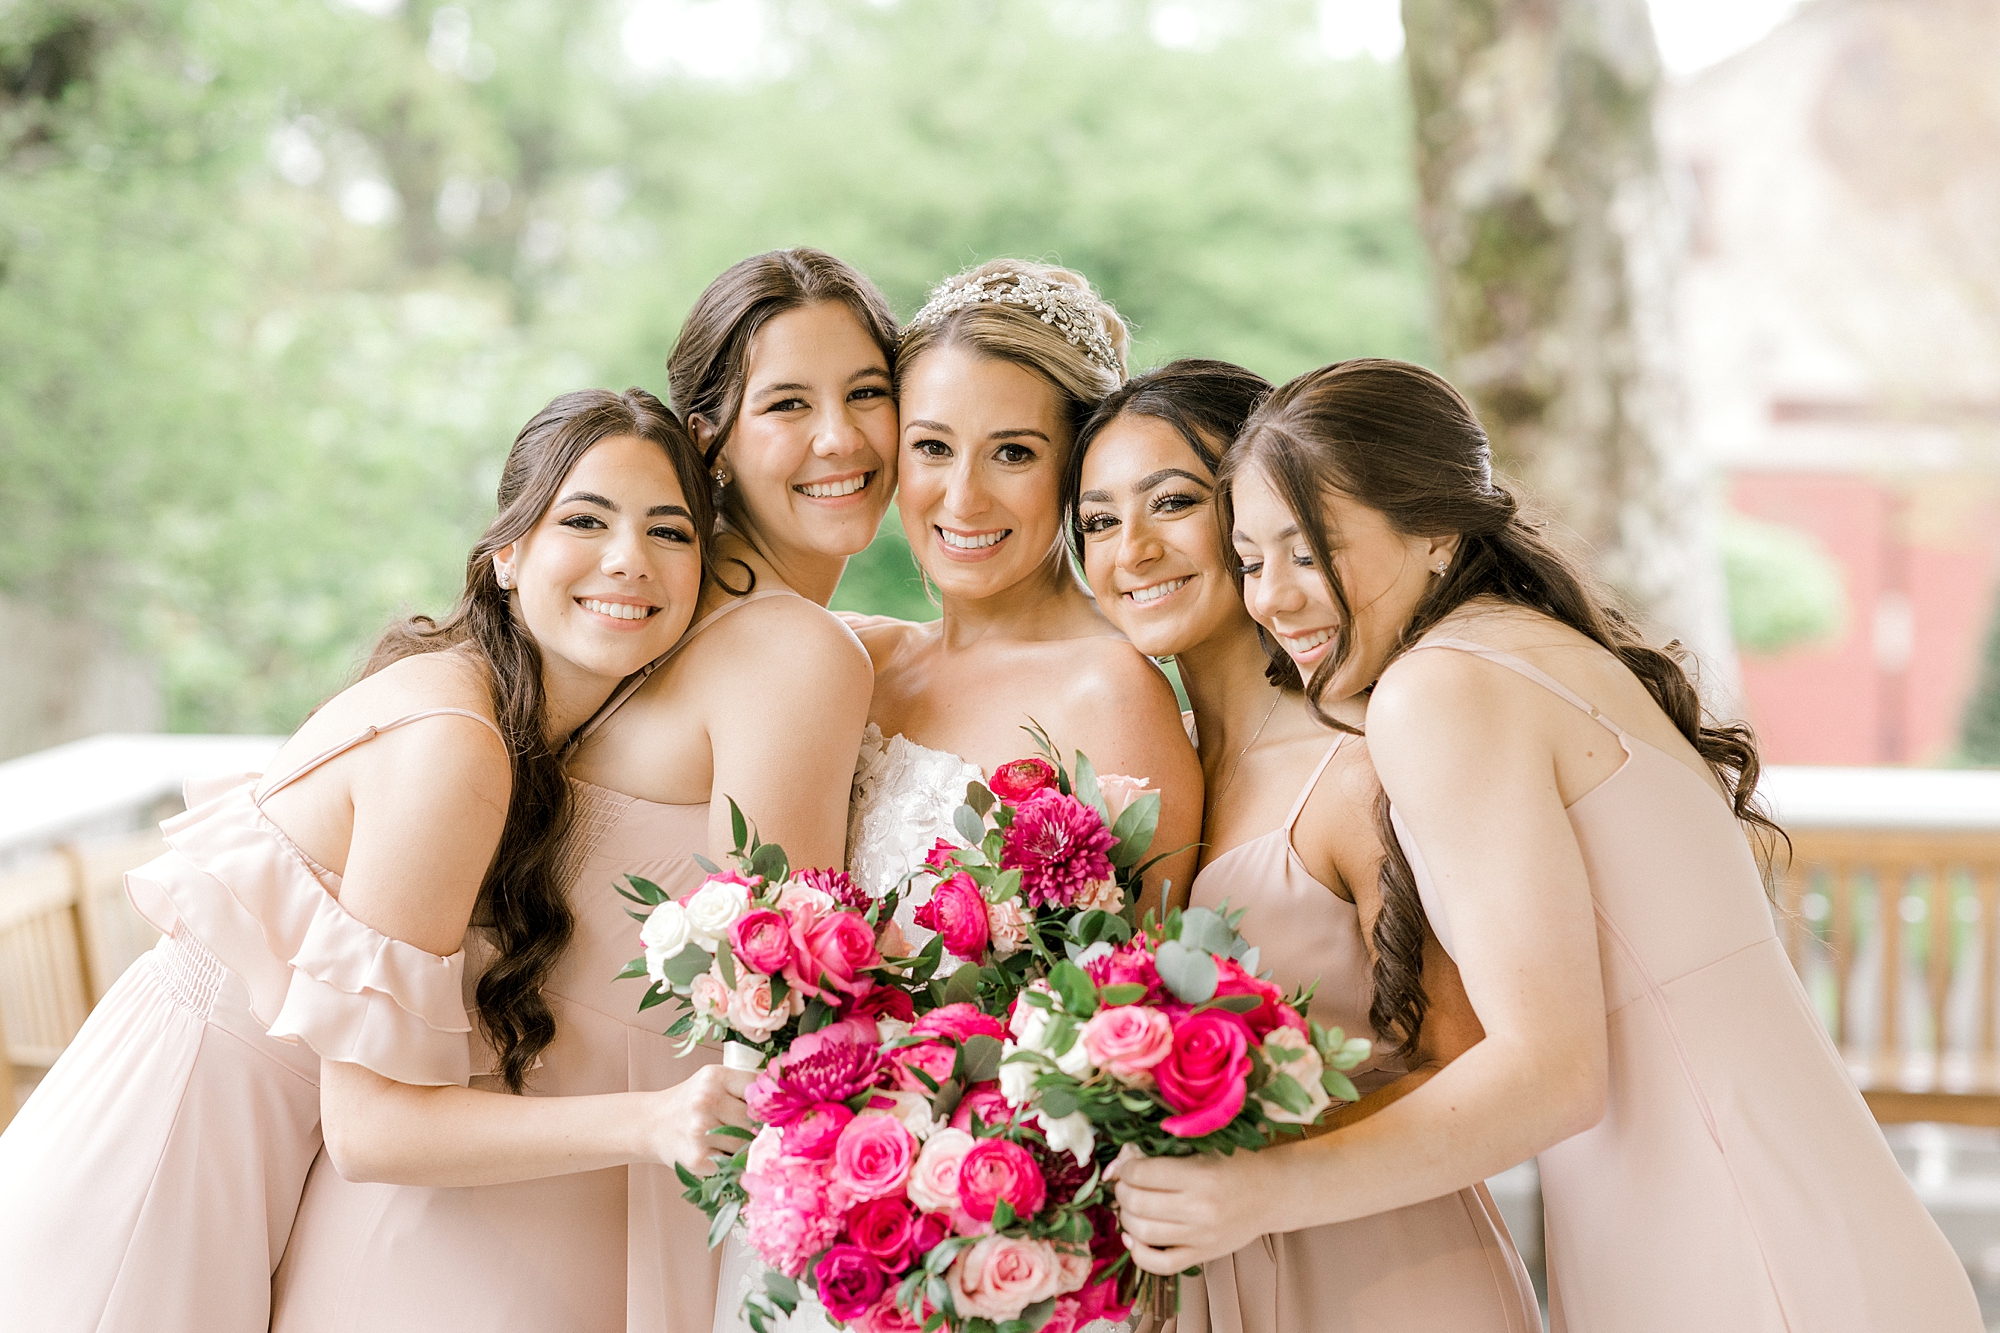 bridesmaids in blush gowns hug bride holding bouquets of bright pink roses